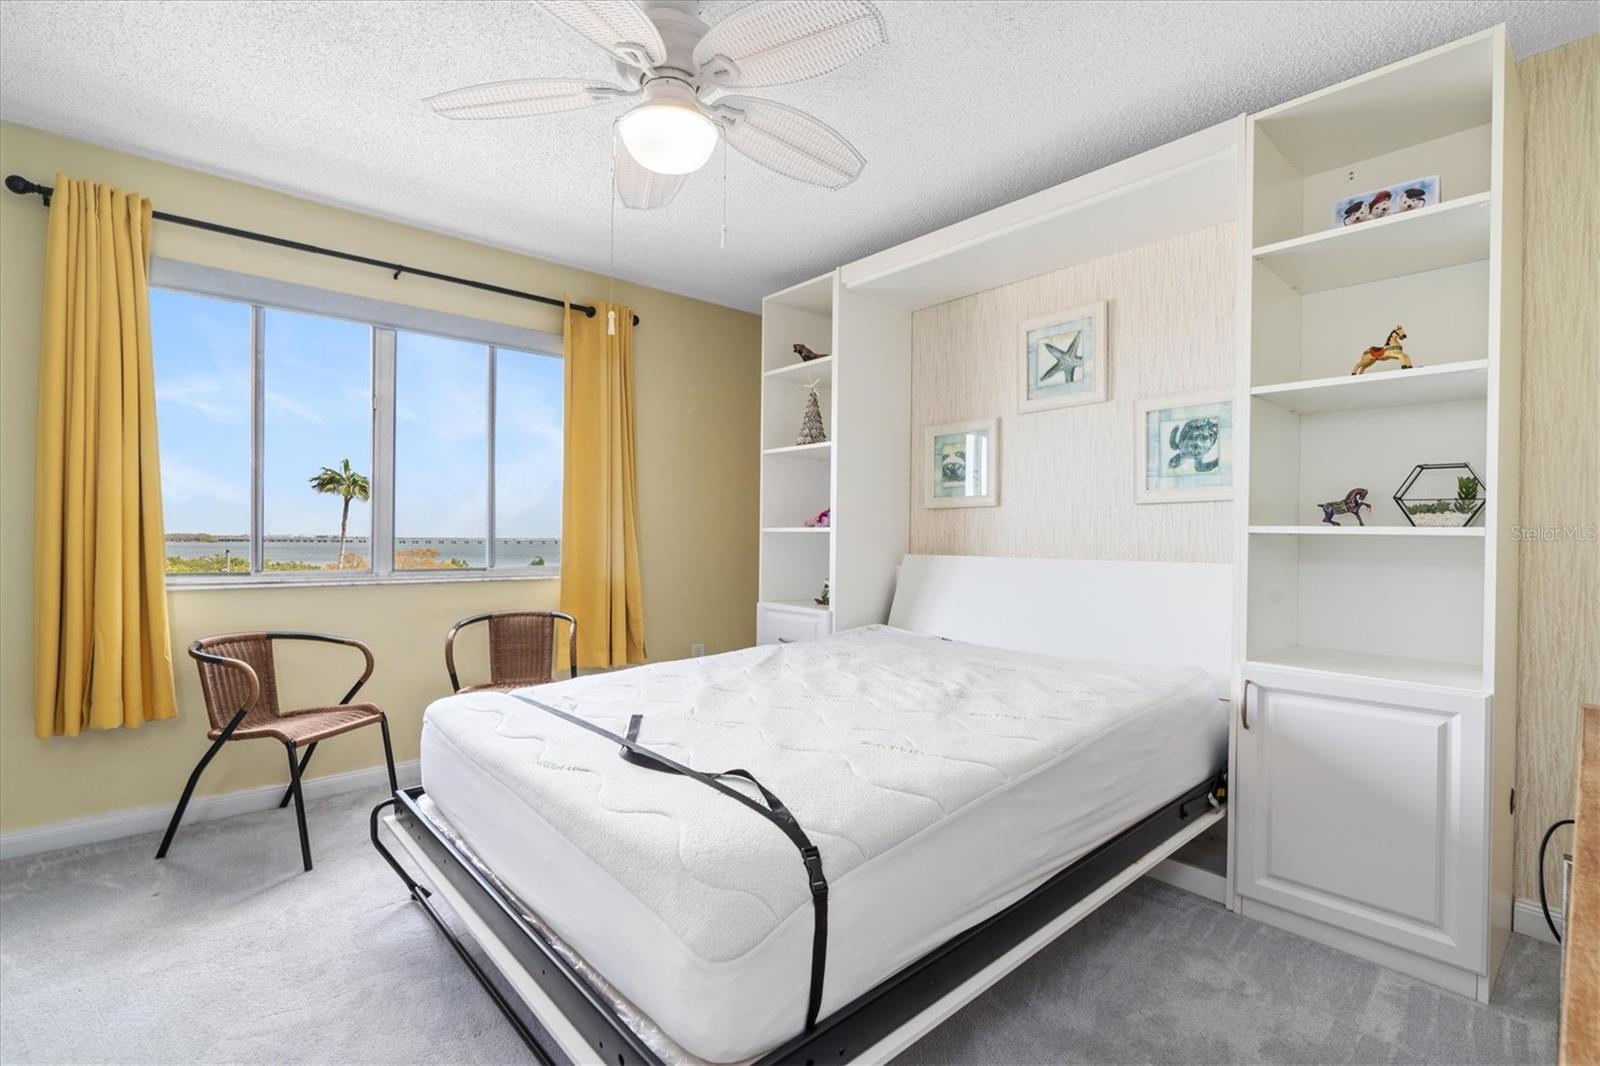 Bedroom 2 with large closet and sliding door to the balcony with views of Tampa Bay